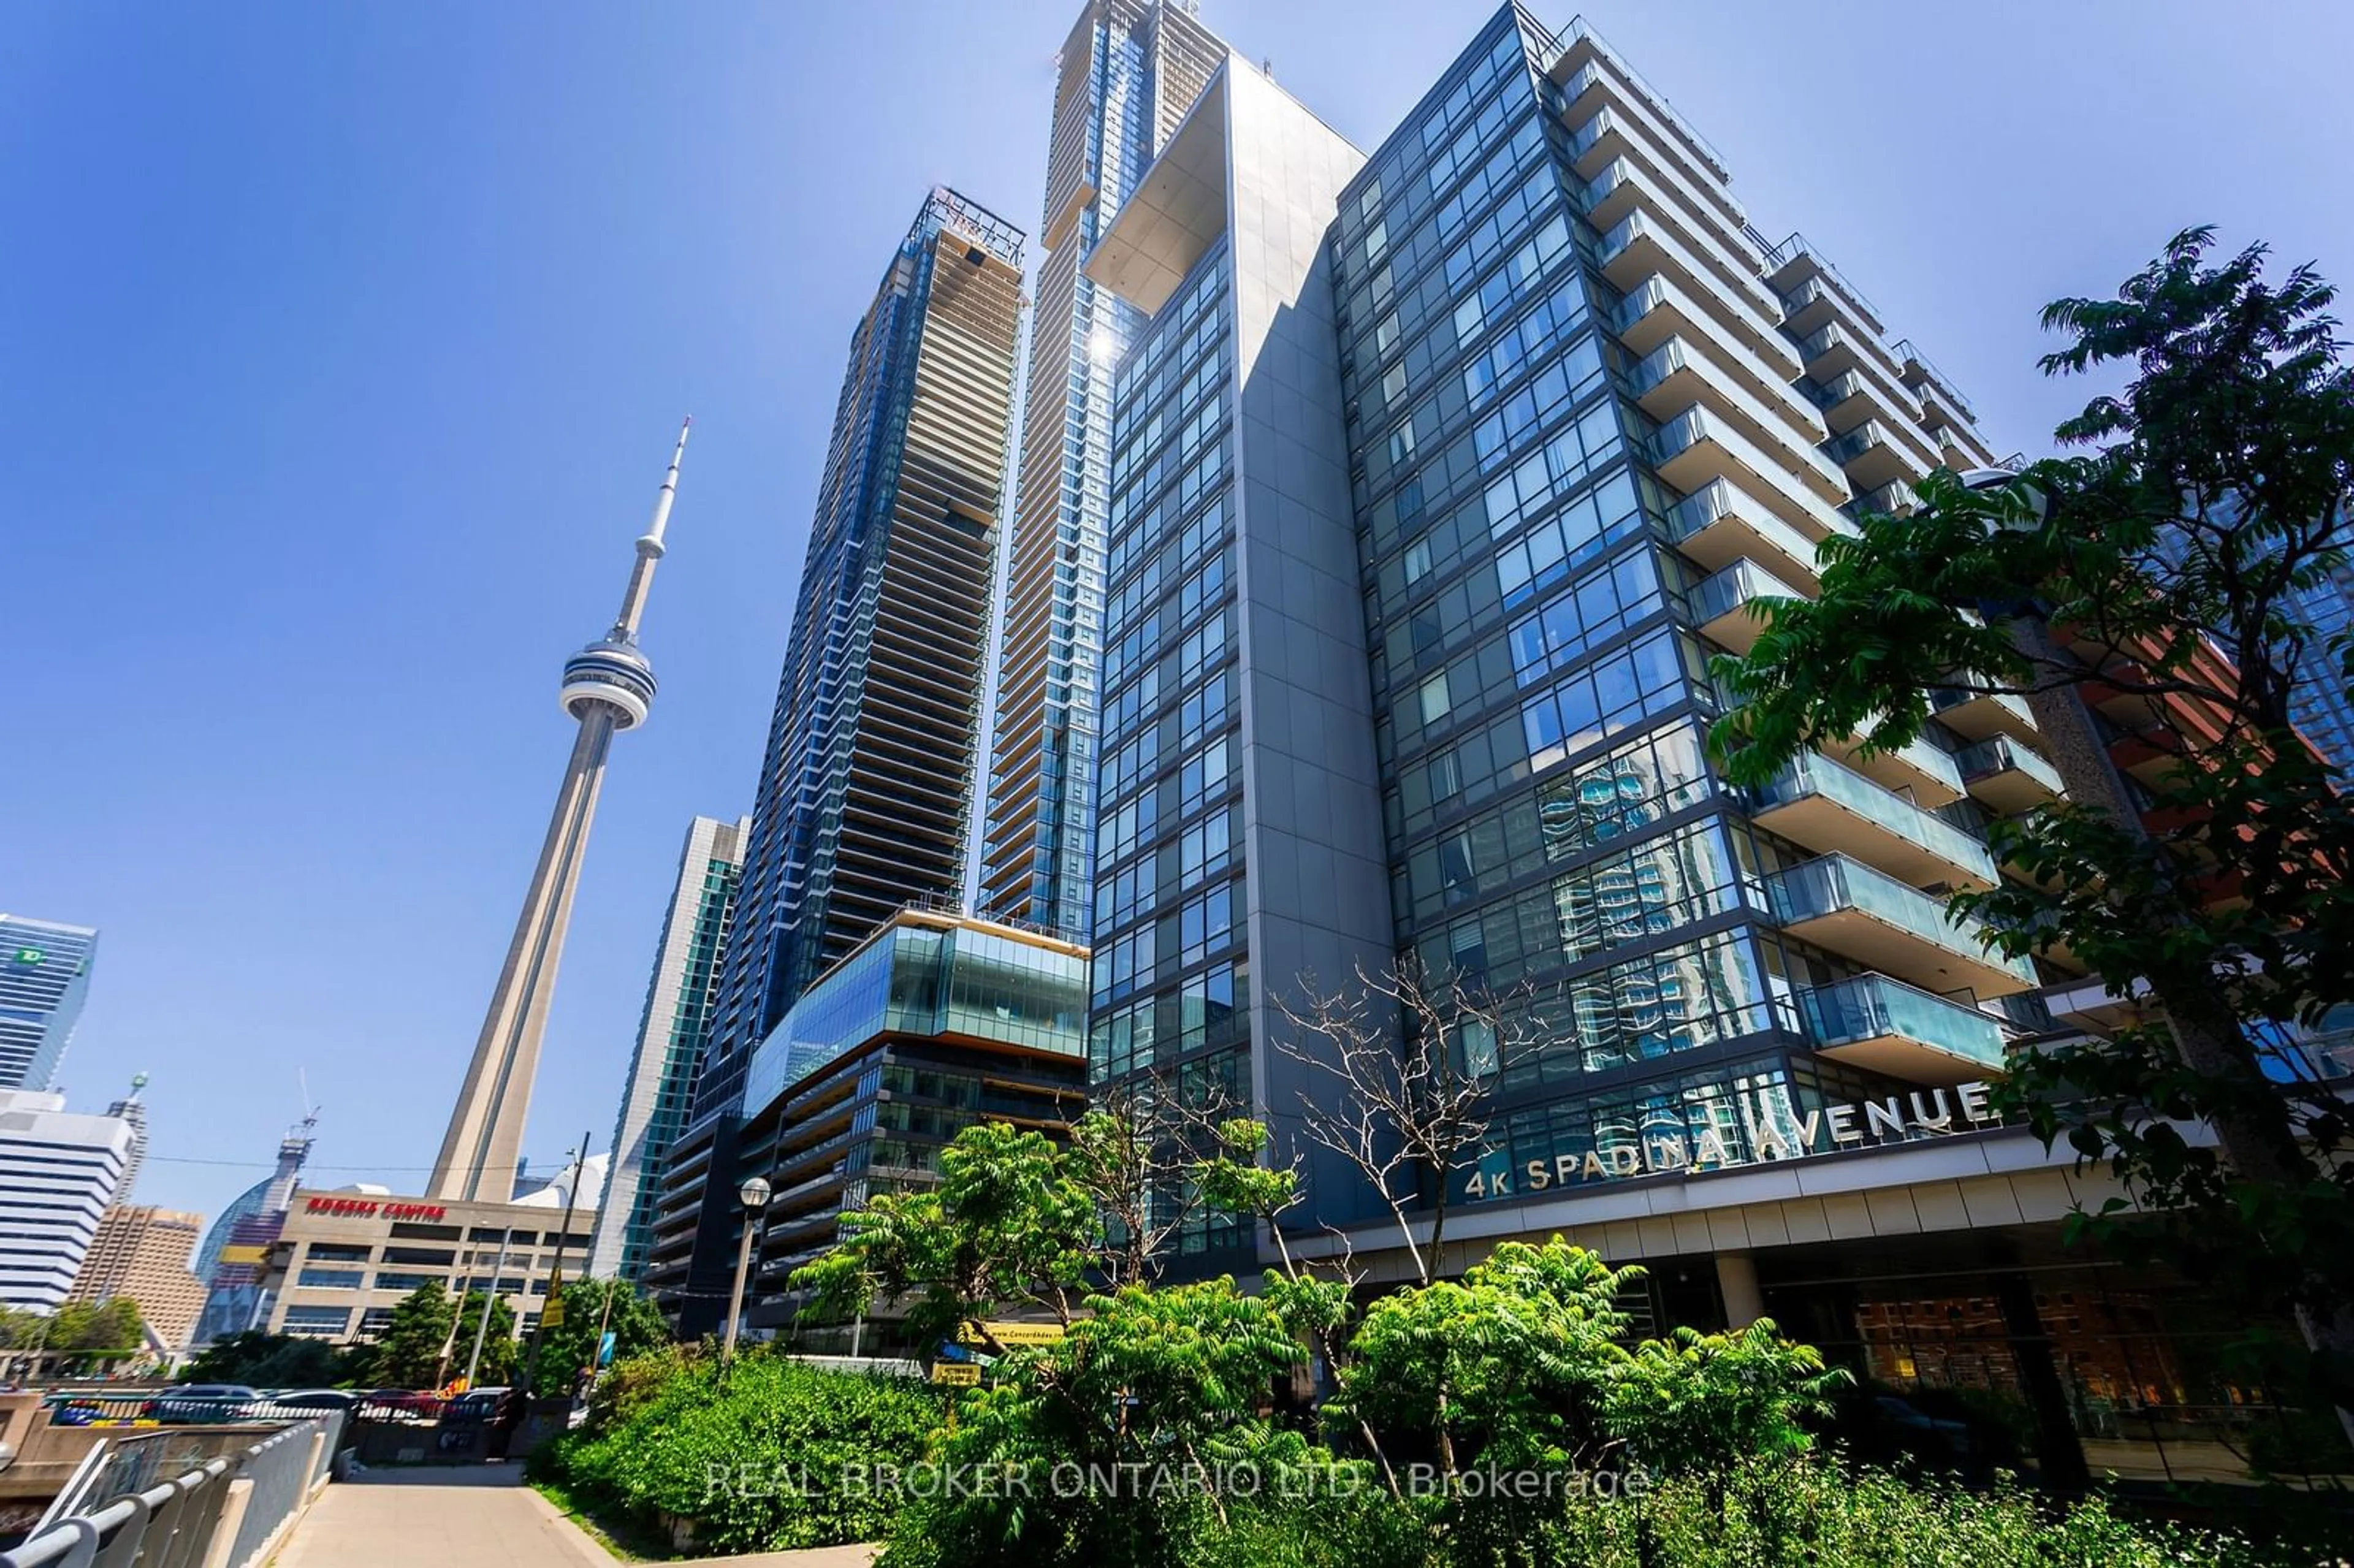 A pic from exterior of the house or condo for 4K Spadina Ave #1710, Toronto Ontario M5V 3Y9